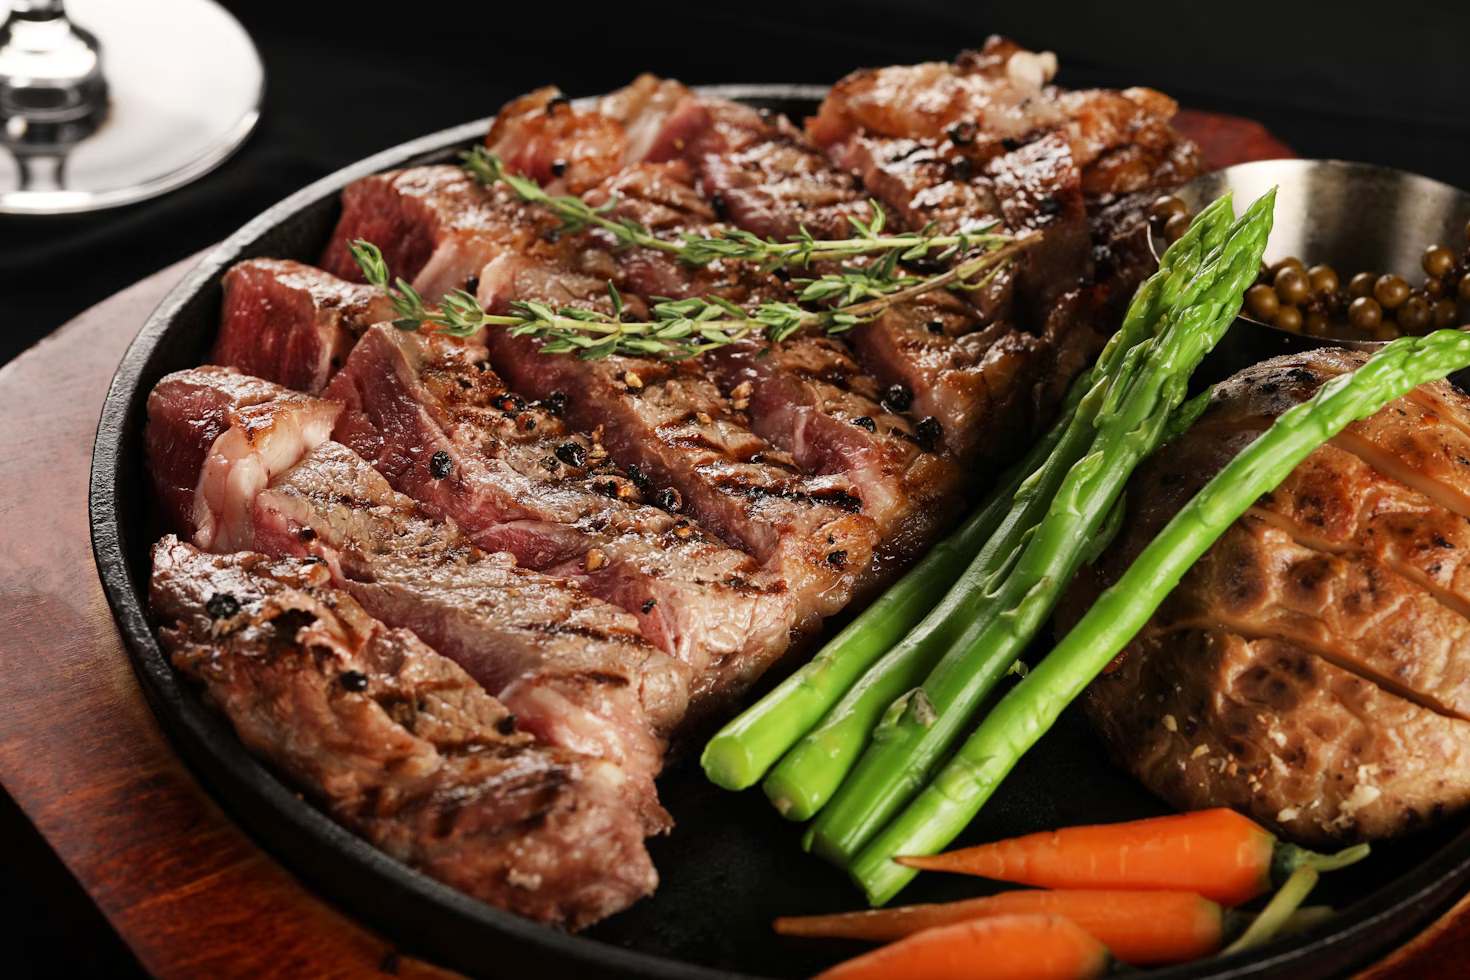 A plate of stake with asparagus and carrots; a close-up photo